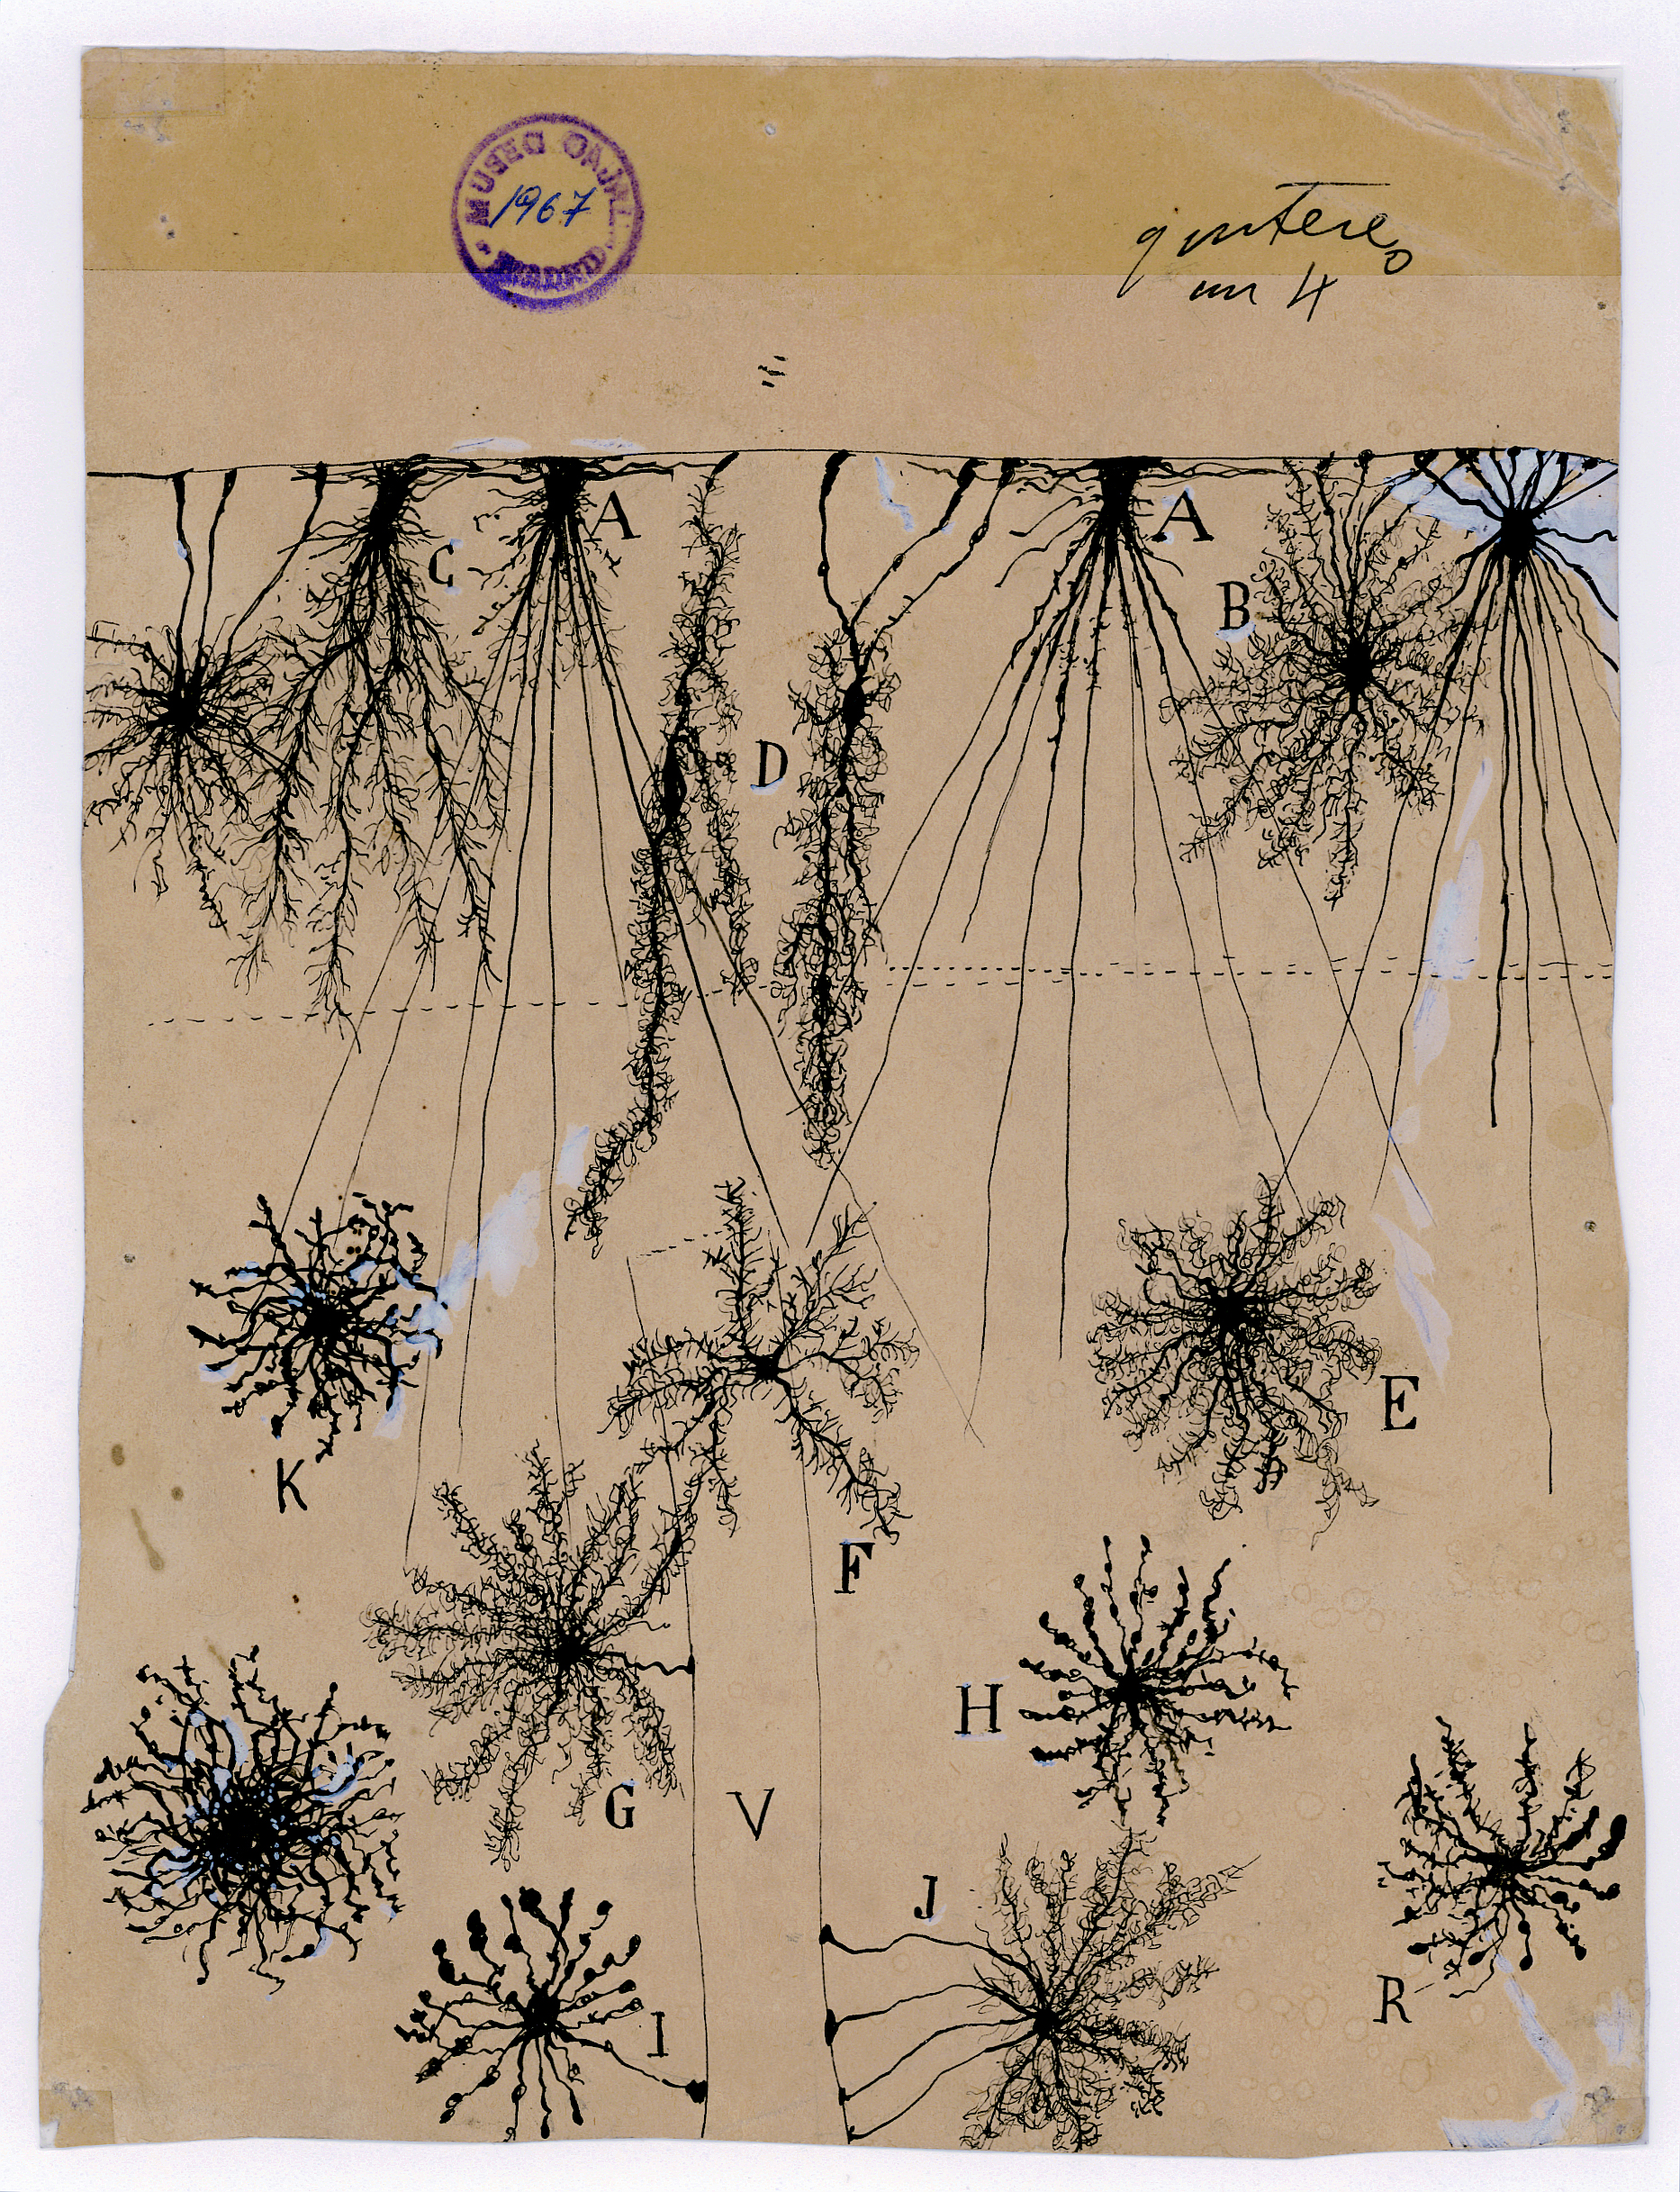 Santiago Ramón y Cajal, glial cells of the cerebral cortex of a child, 1904, ink and pencil on paper. Courtesy of Instituto Cajal (CSIC).